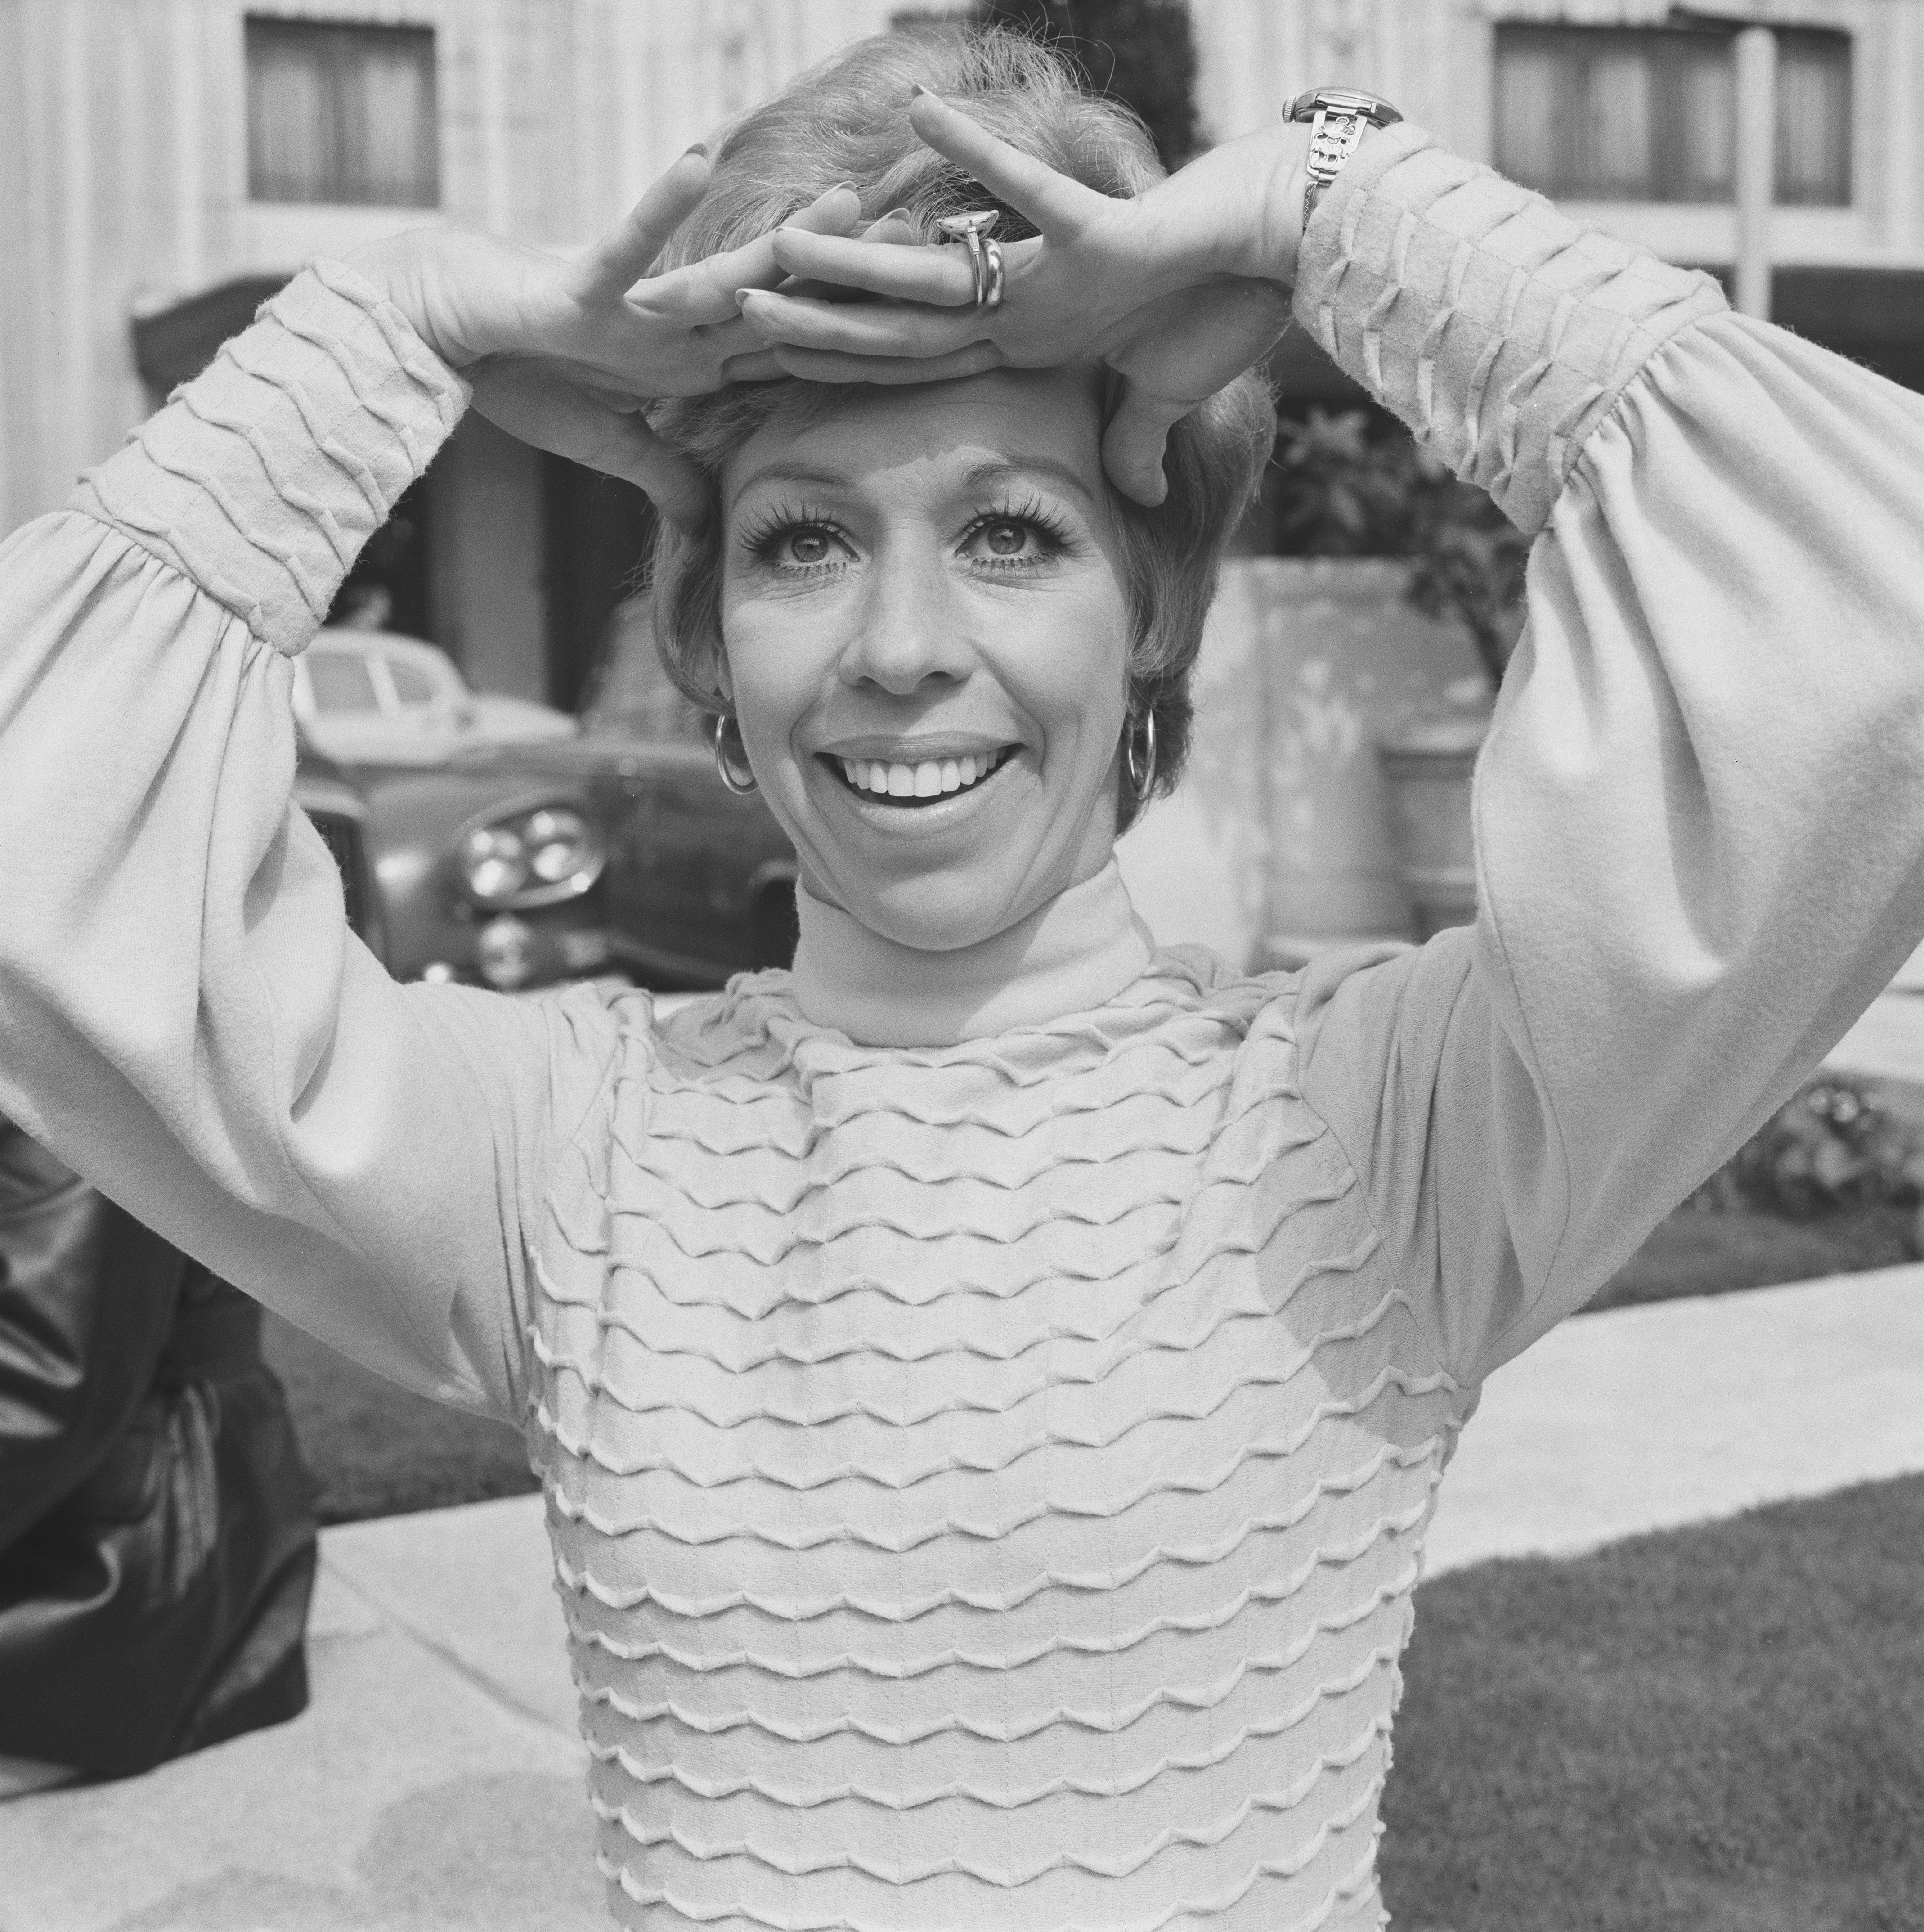 American actress and comedian Carol Burnett stands outside the Dorchester Hotel in London on 14th May 1970. | Source: Getty Images